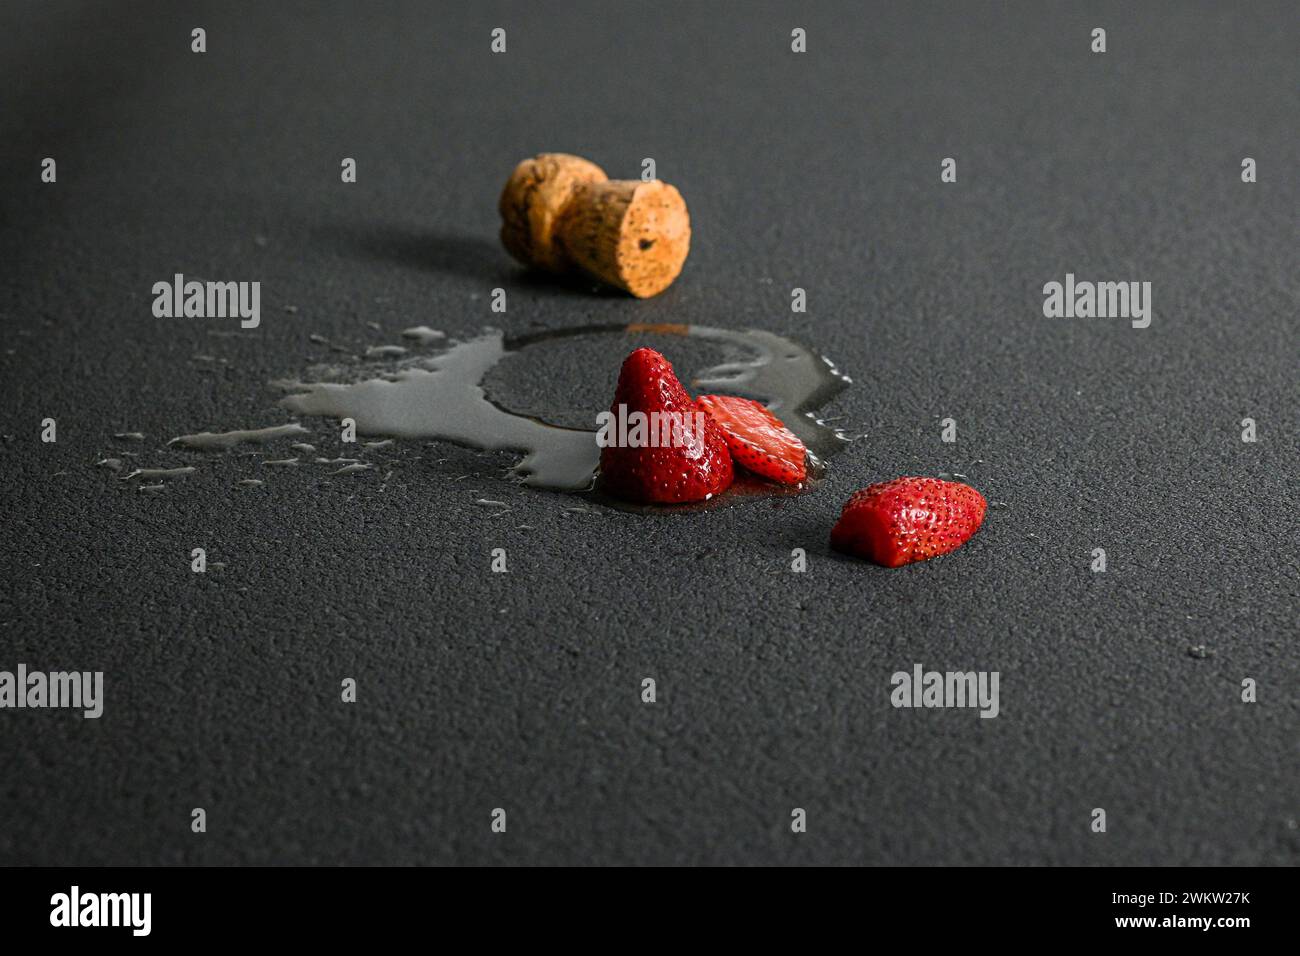 spilled wine with cork and strawberries on black background, side view. Stock Photo